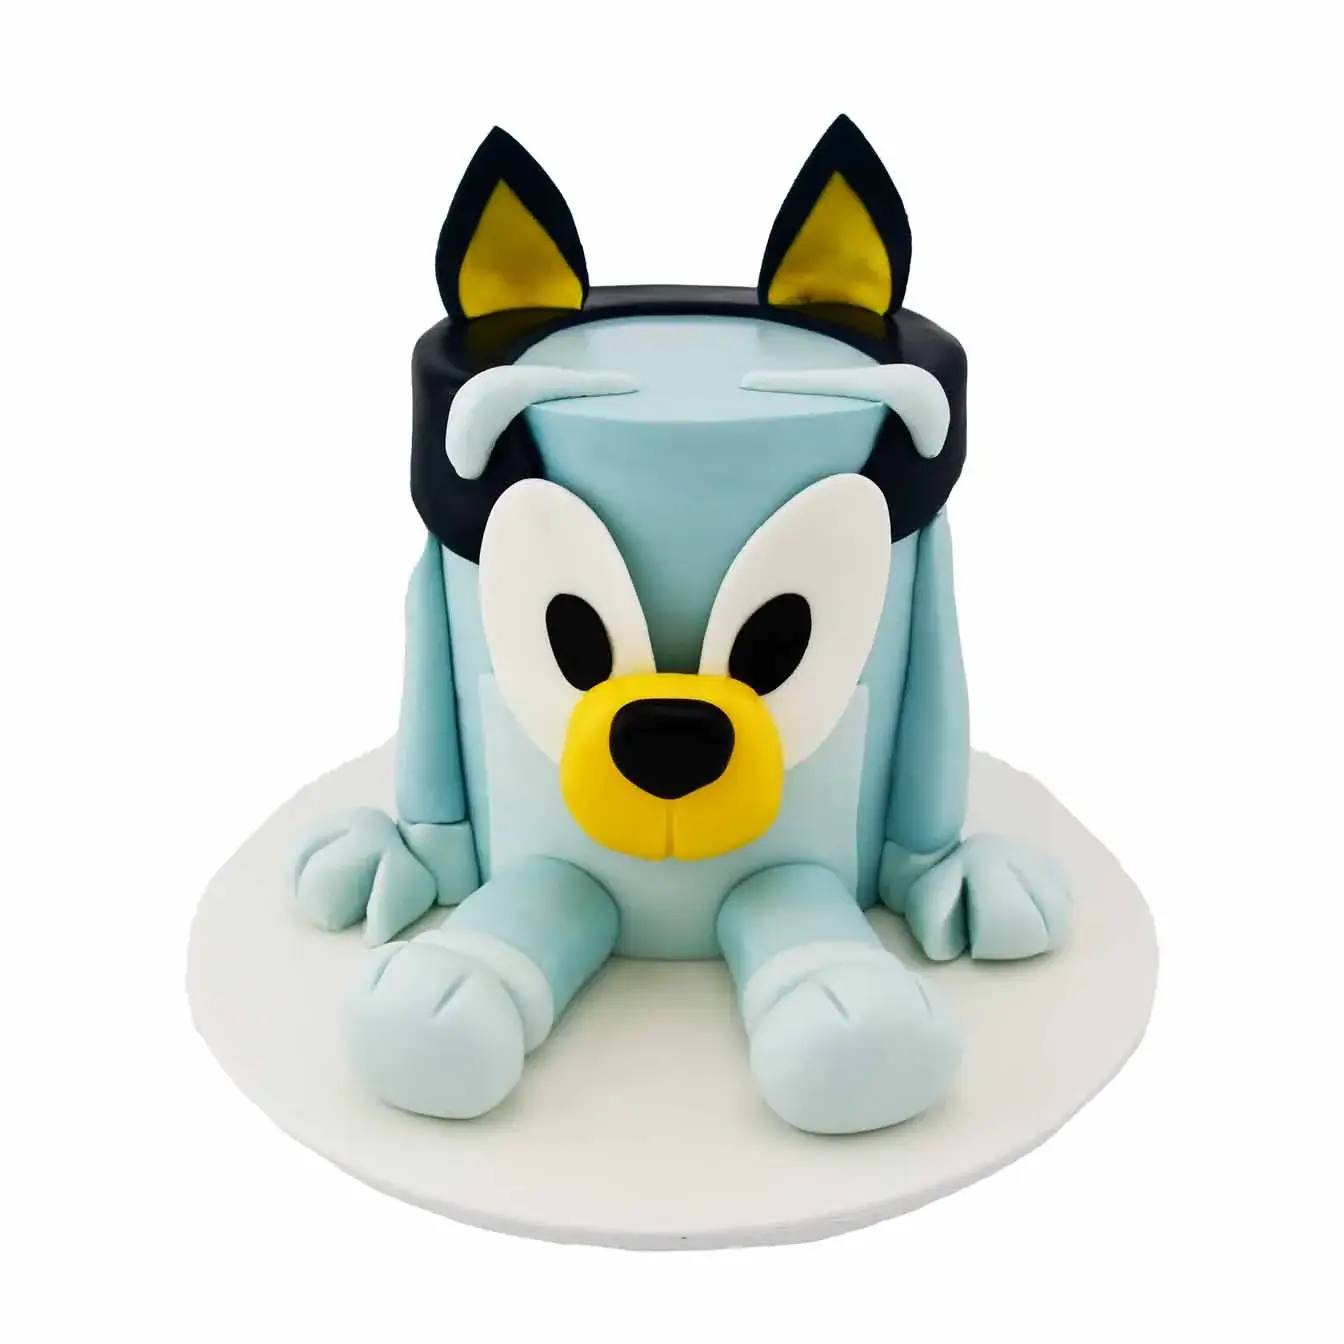 3D Bluey cake with intricate details, featuring Bluey's signature blue fur and facial features. Perfect centerpiece for a Bluey-themed party